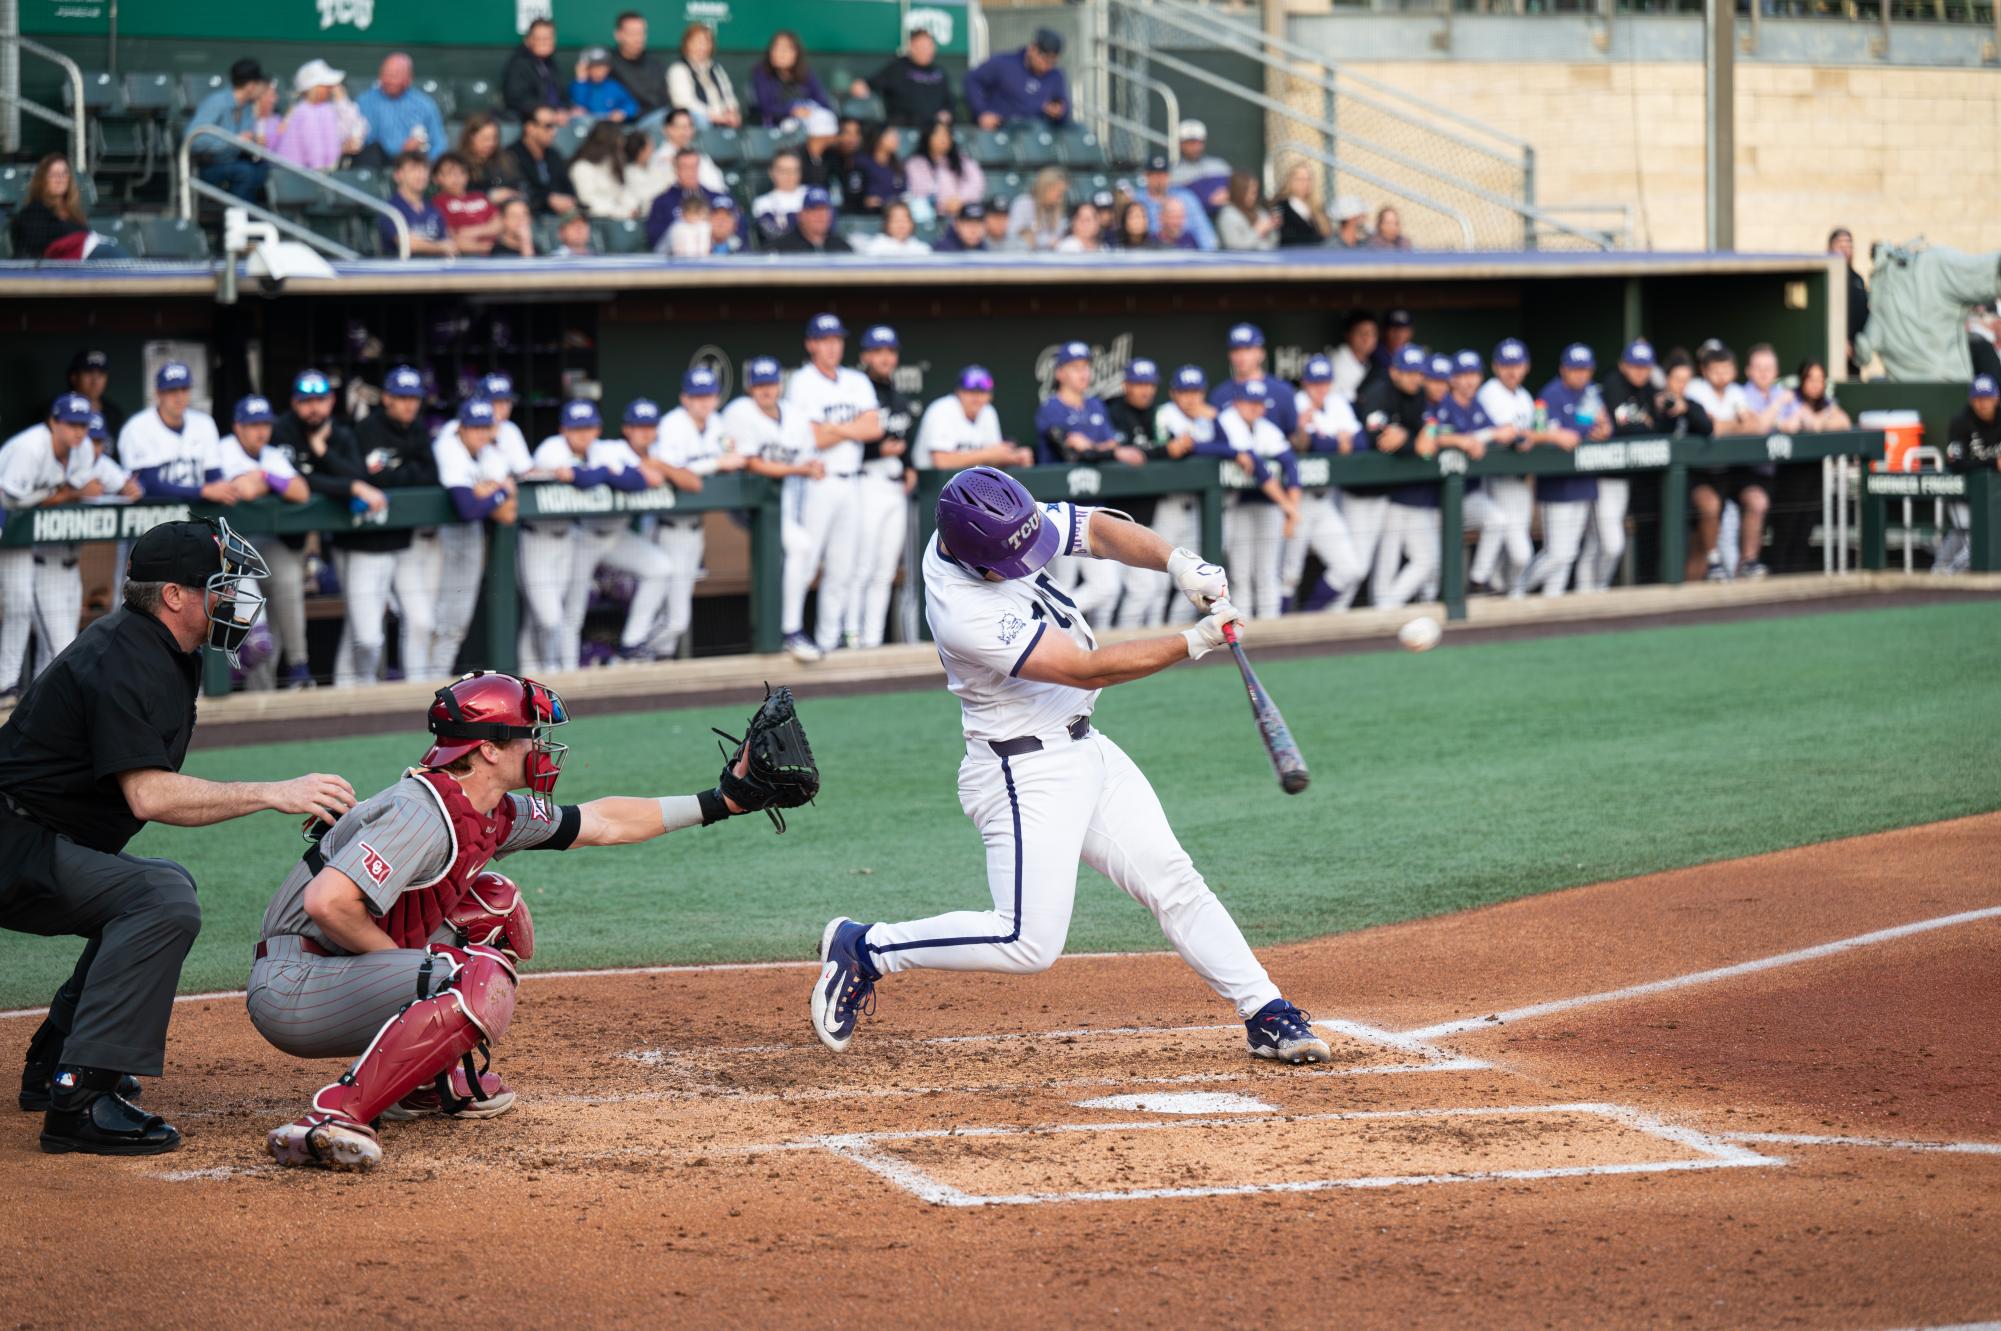 TCU baseball shines with midweek win over DBU led by Bowen and Myers